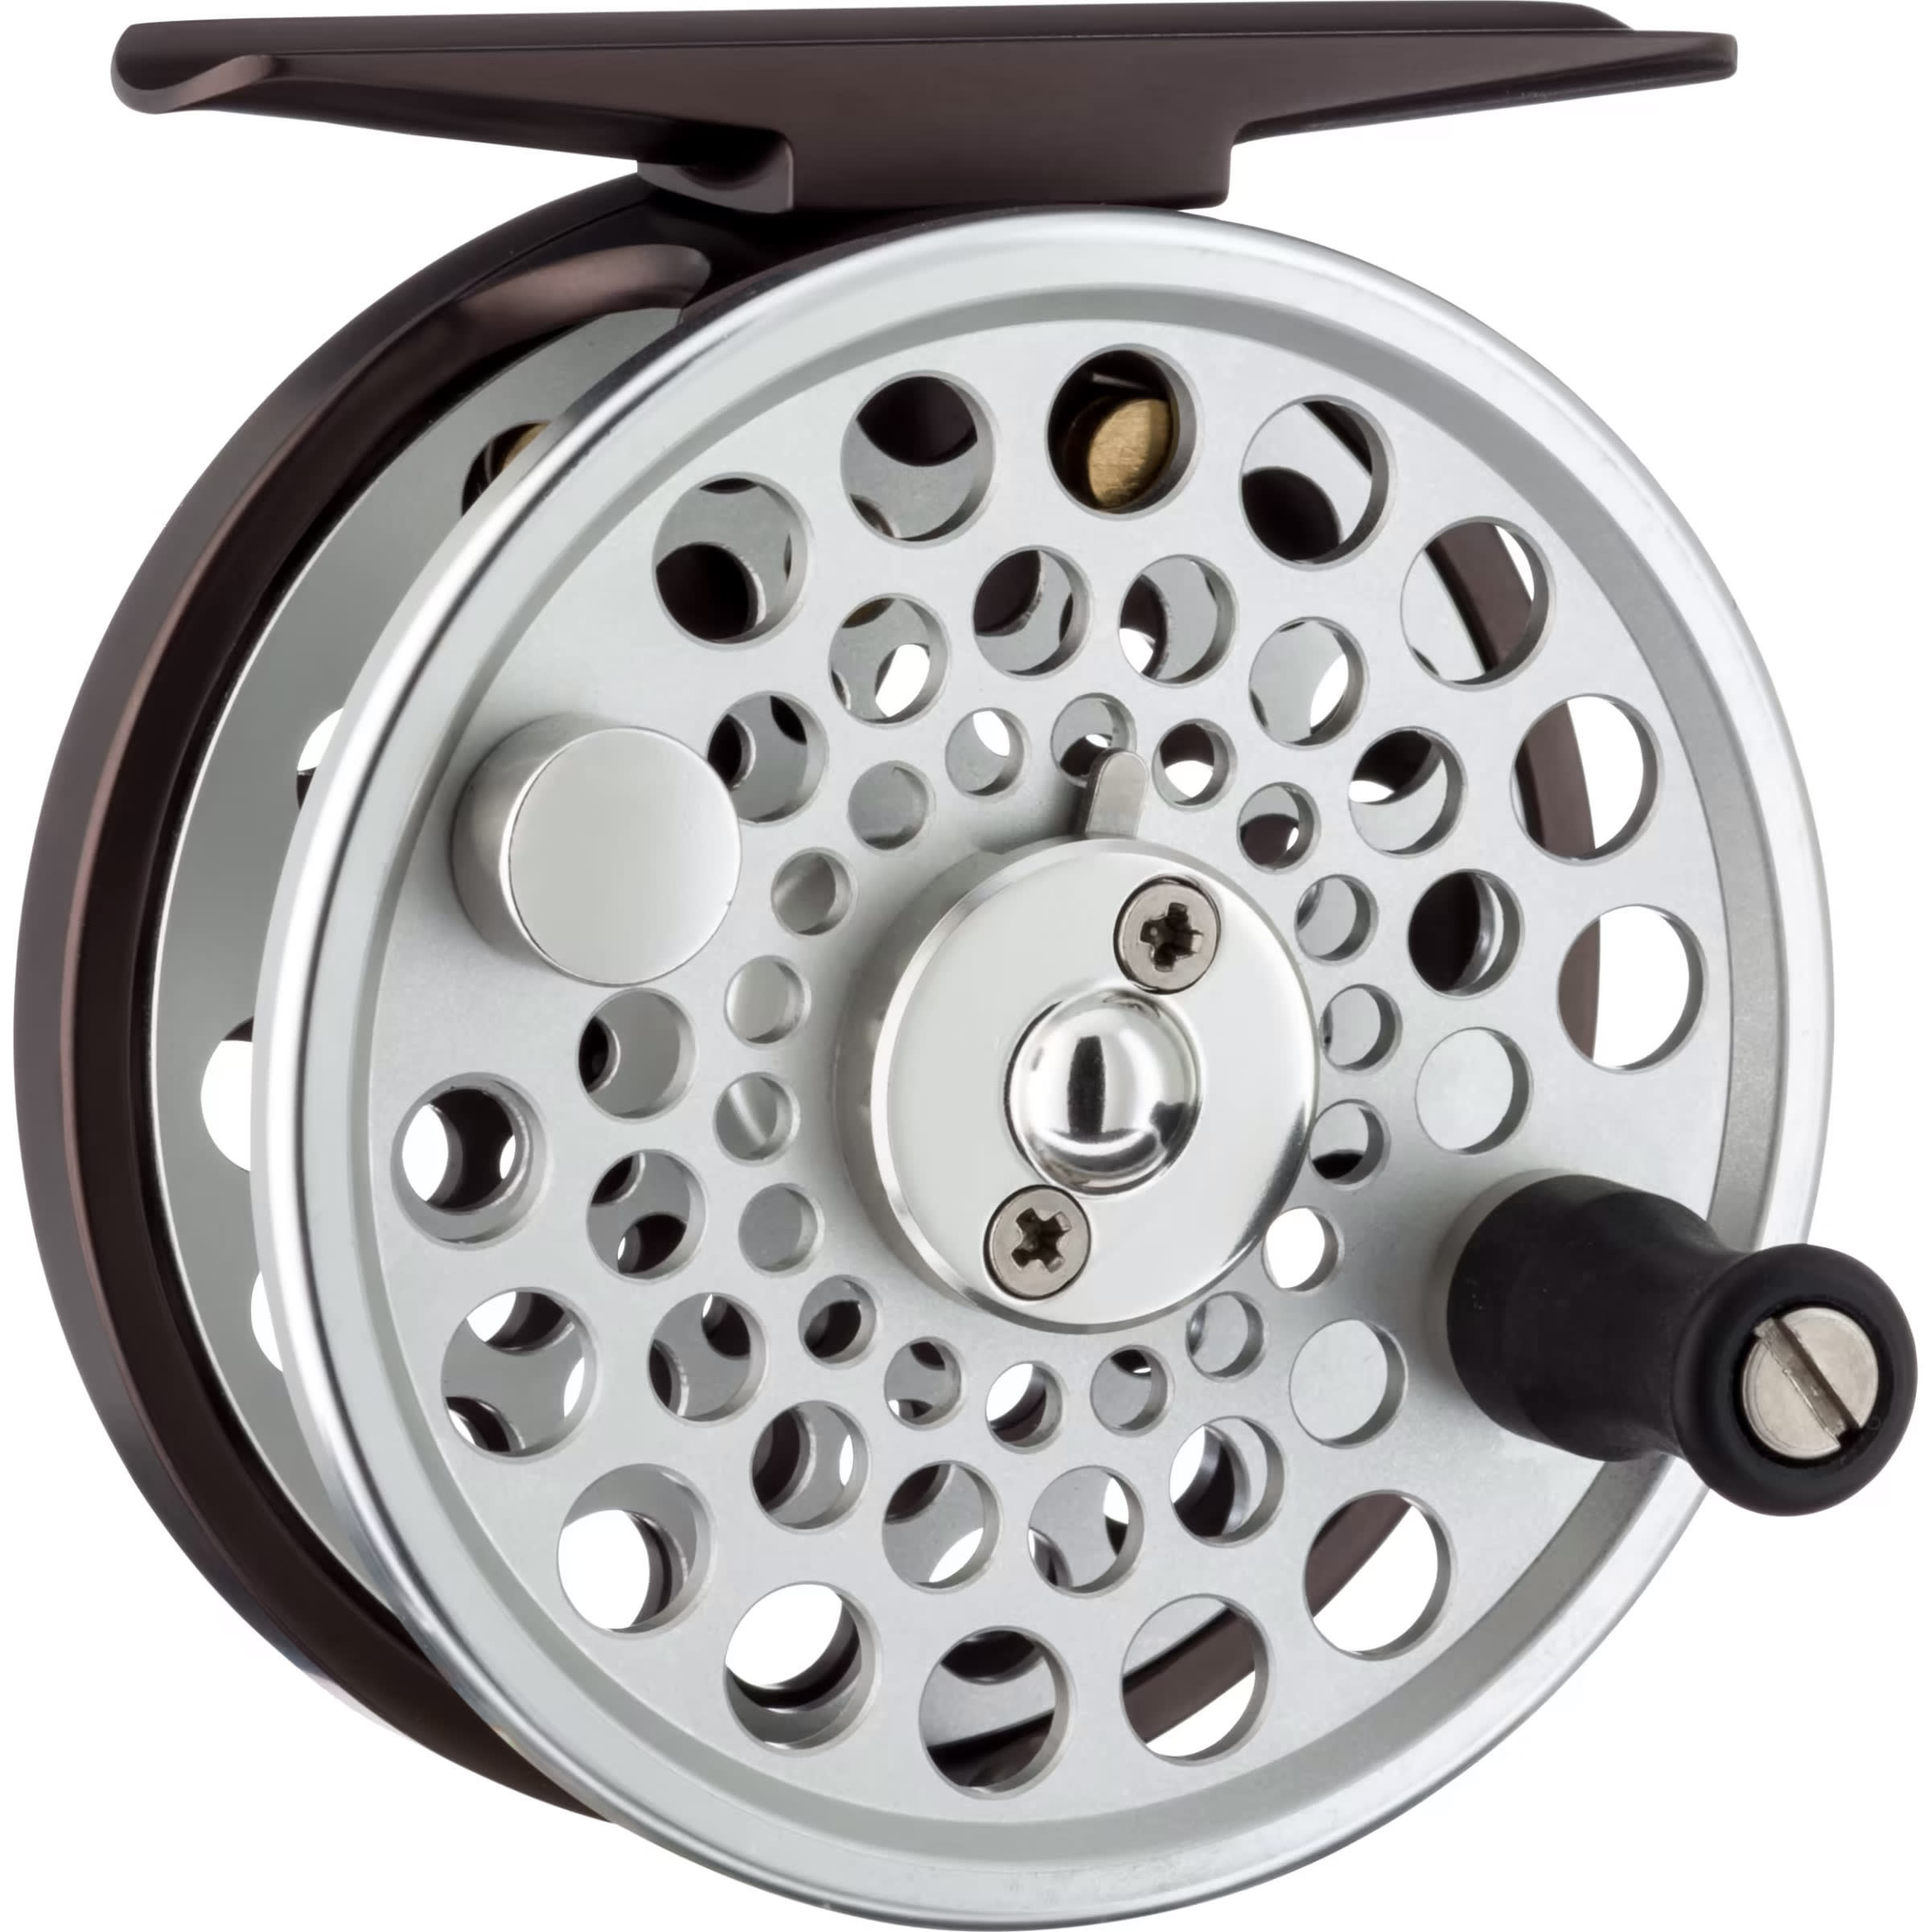 White River Fly Shop Classic Reel and Cabela's CGR Rod Fly Outfit